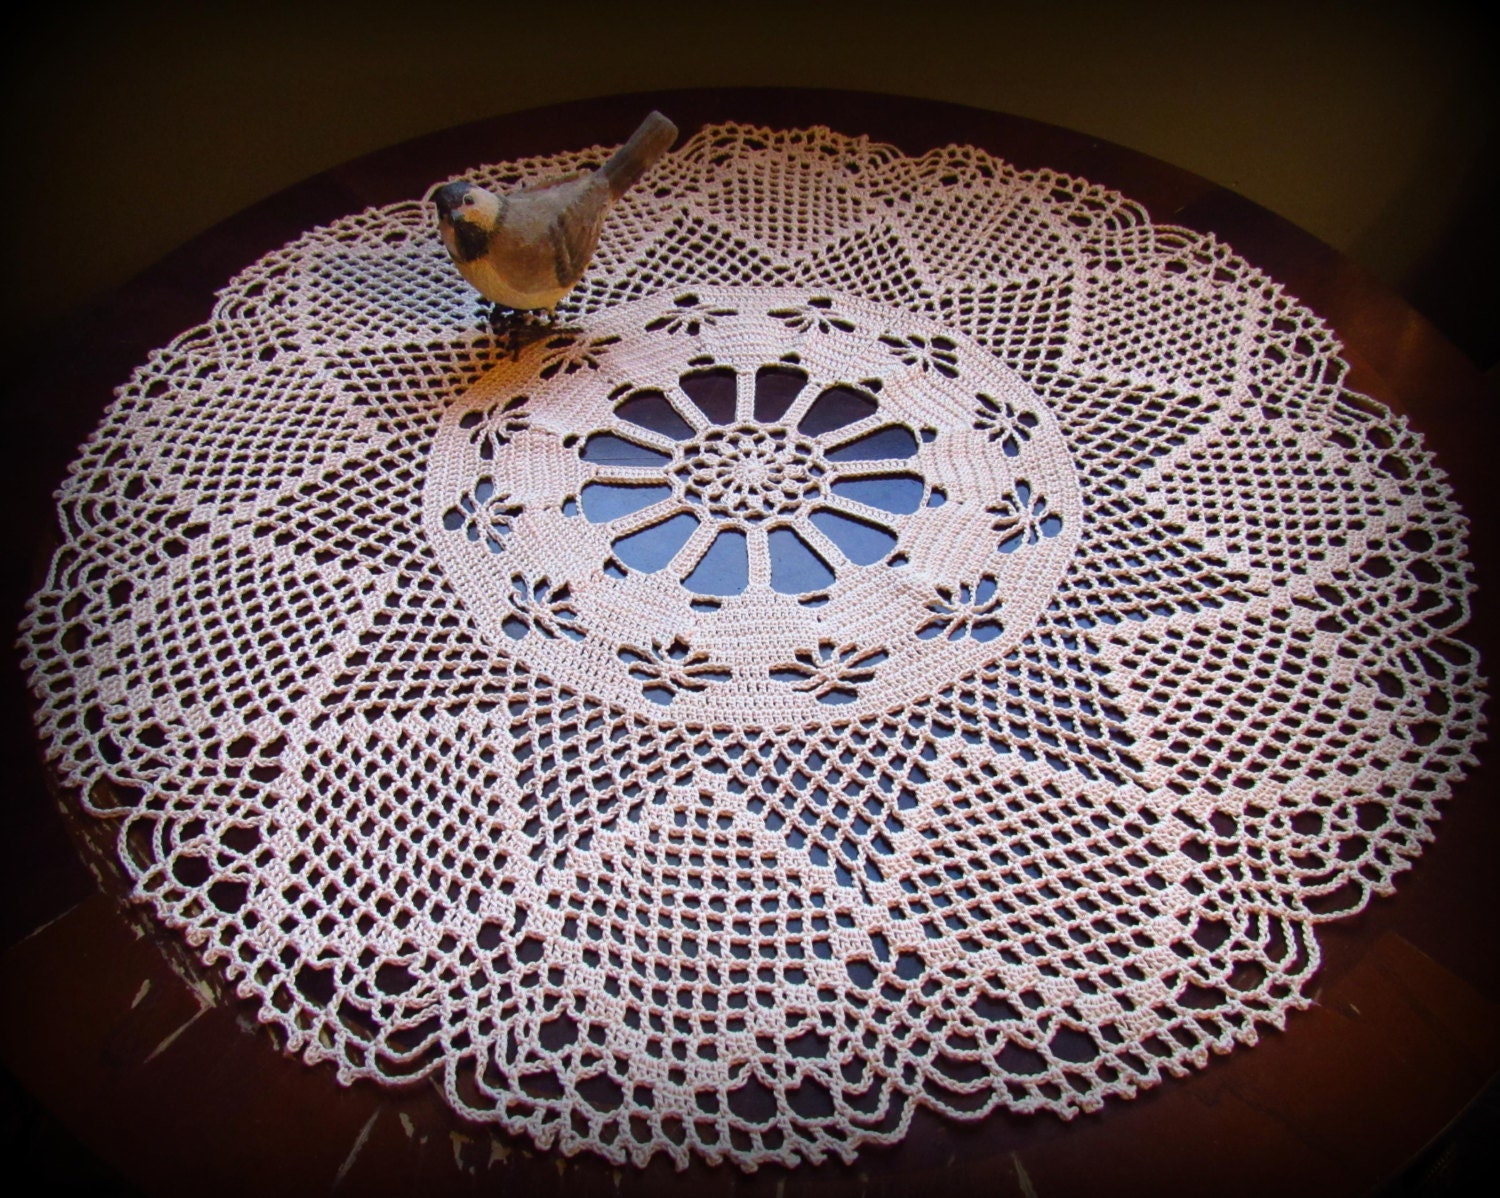 White Hand Crochet Round Table Lace Doily/Topper Pineapple Pattern 19-21inch 